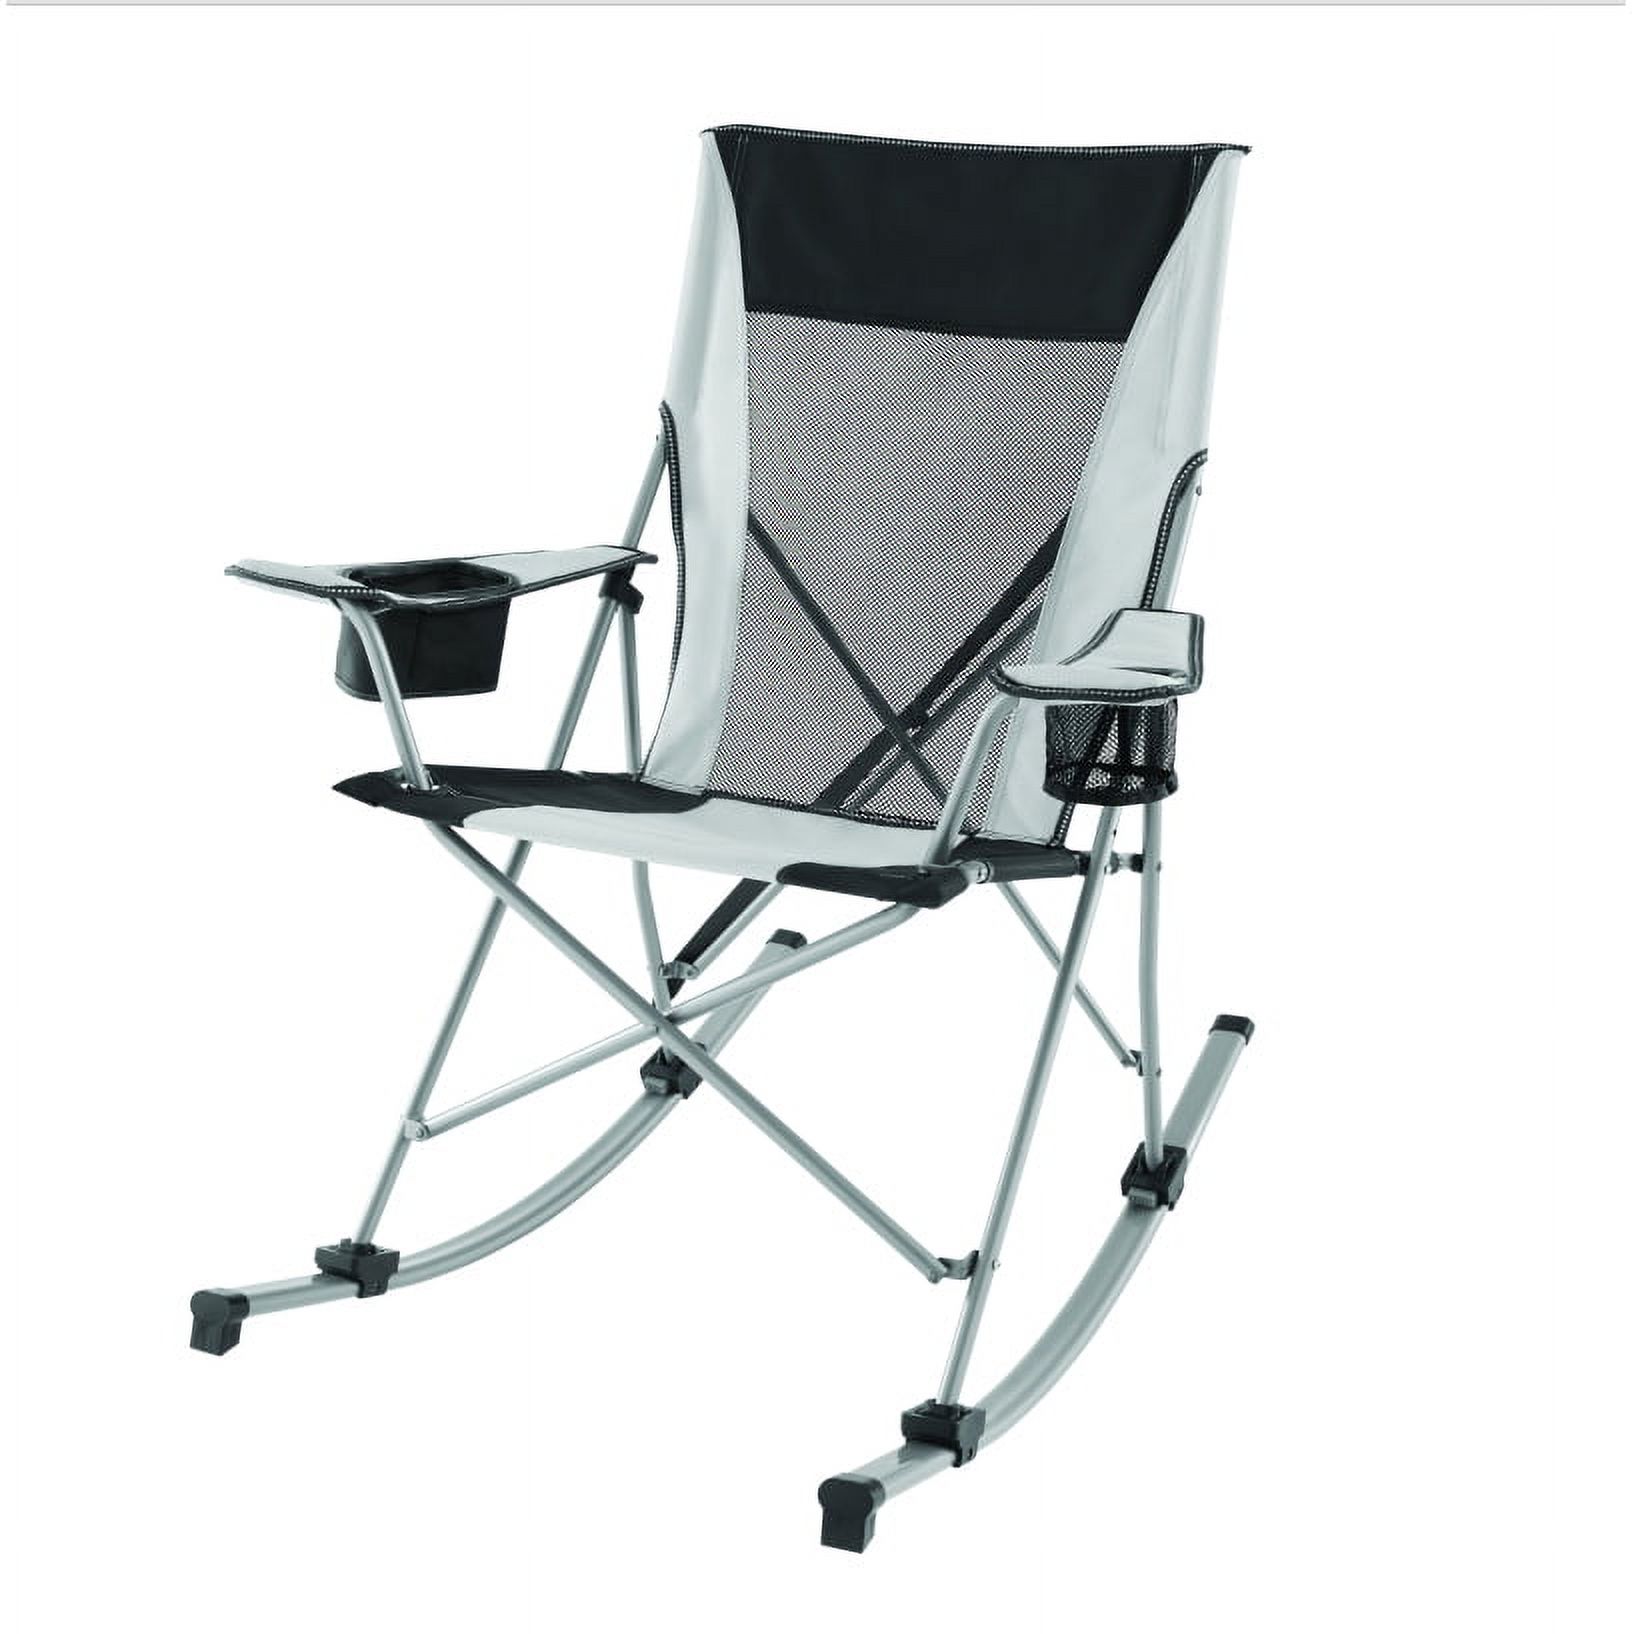 Ozark Trail Tension 2 in 1 Mesh Rocking Camp Chair, Gray and Black, Detachable Rockers, Adult - image 1 of 10